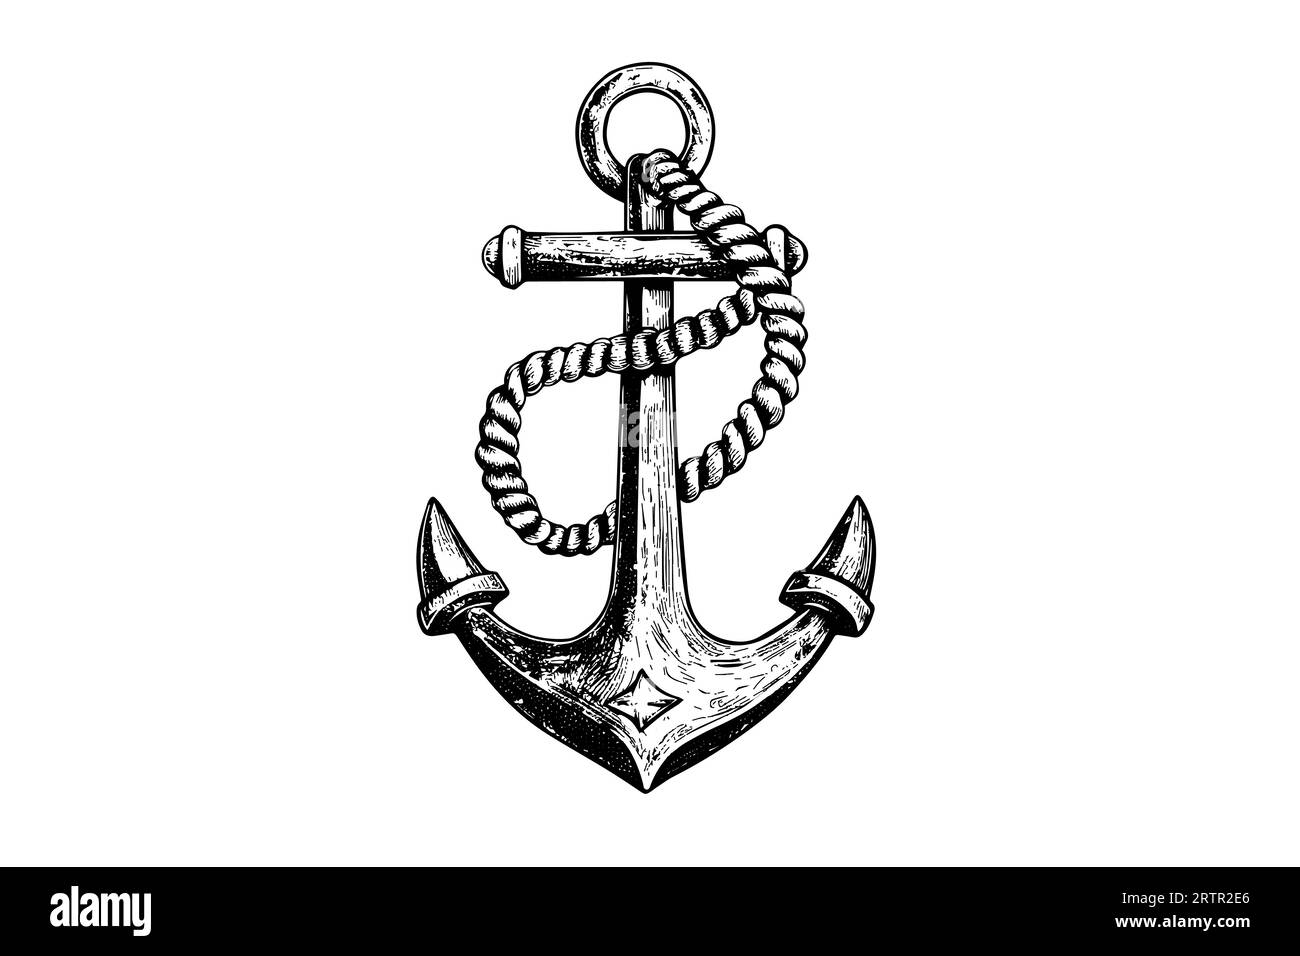 Ship sea anchor and rope in vintage engraving style. Sketch hand drawn ...